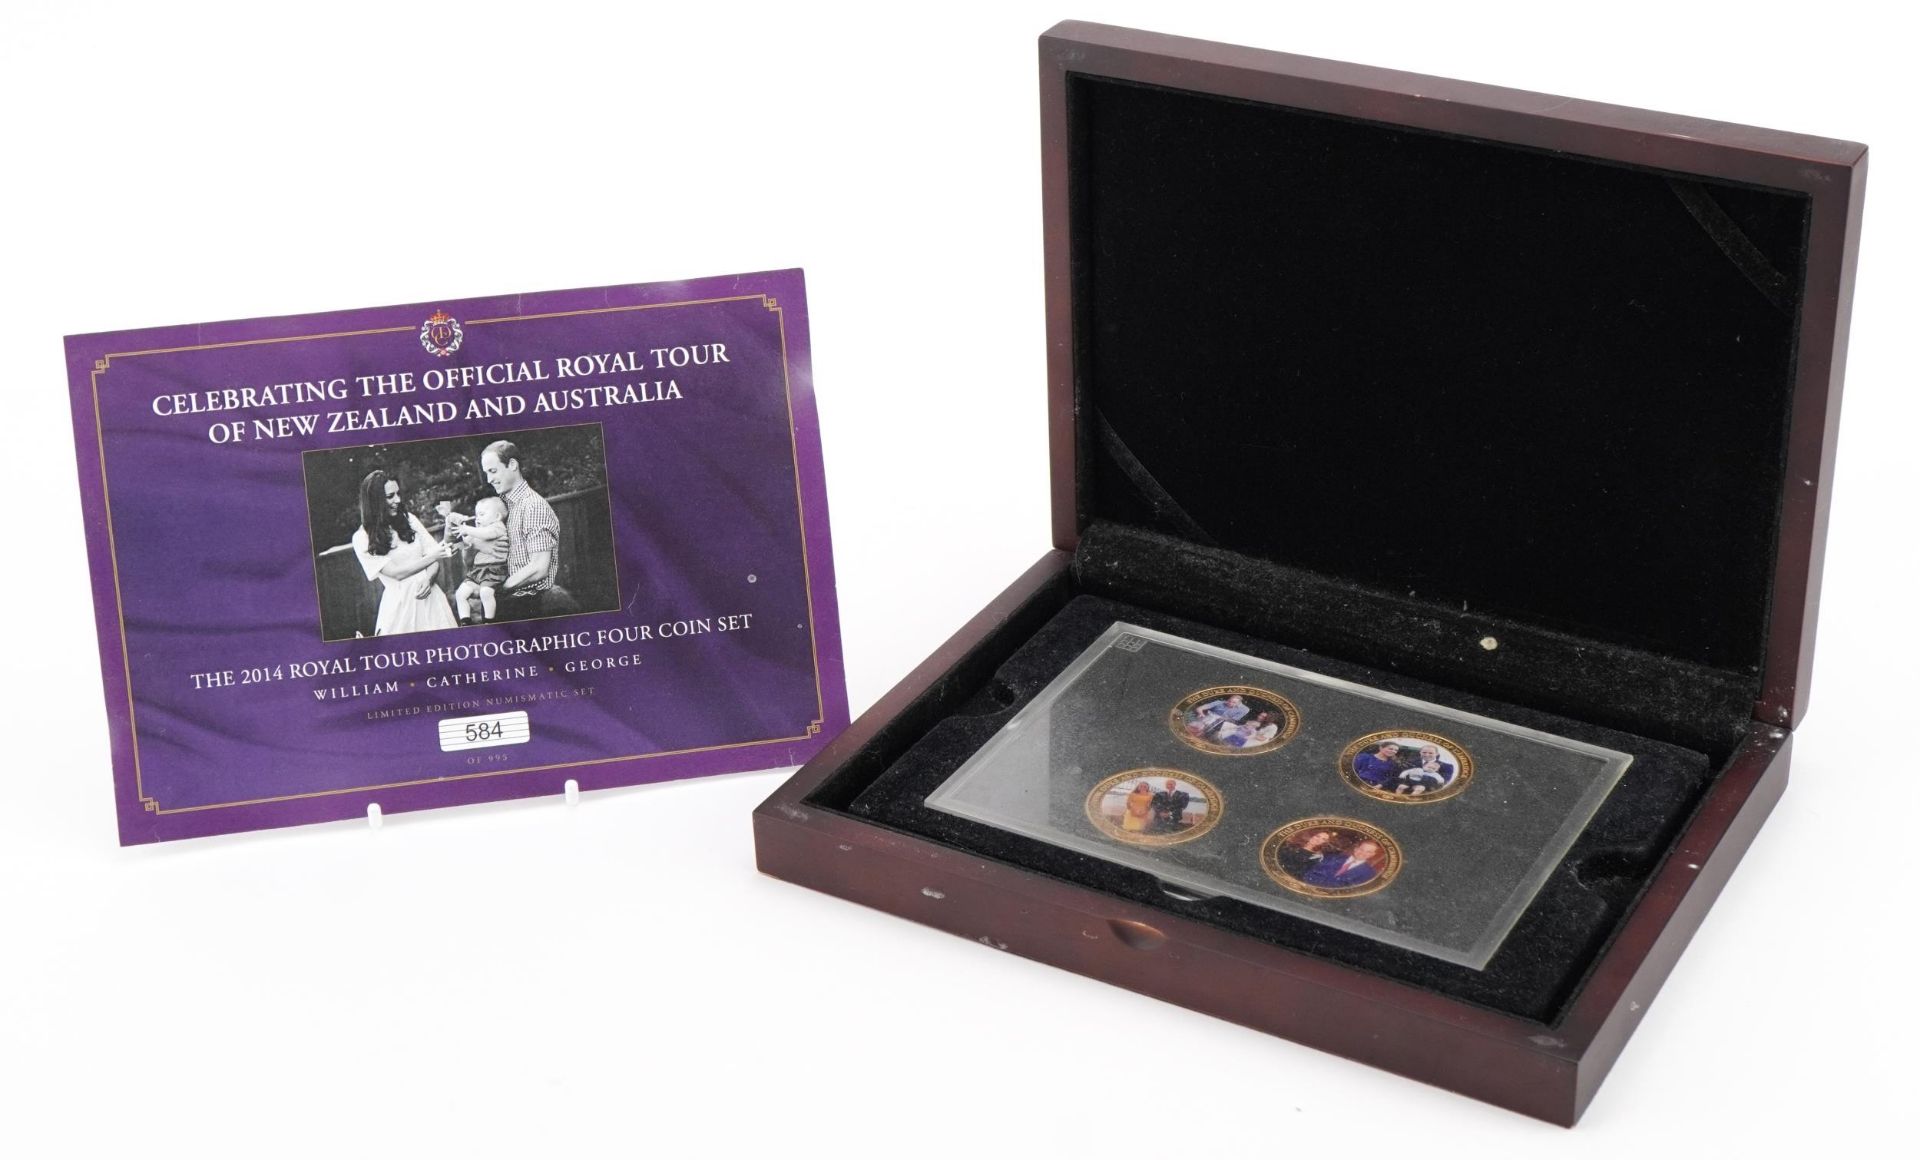 Celebrating the official Royal Tour of New Zealand and Australia, photographic four coin set with